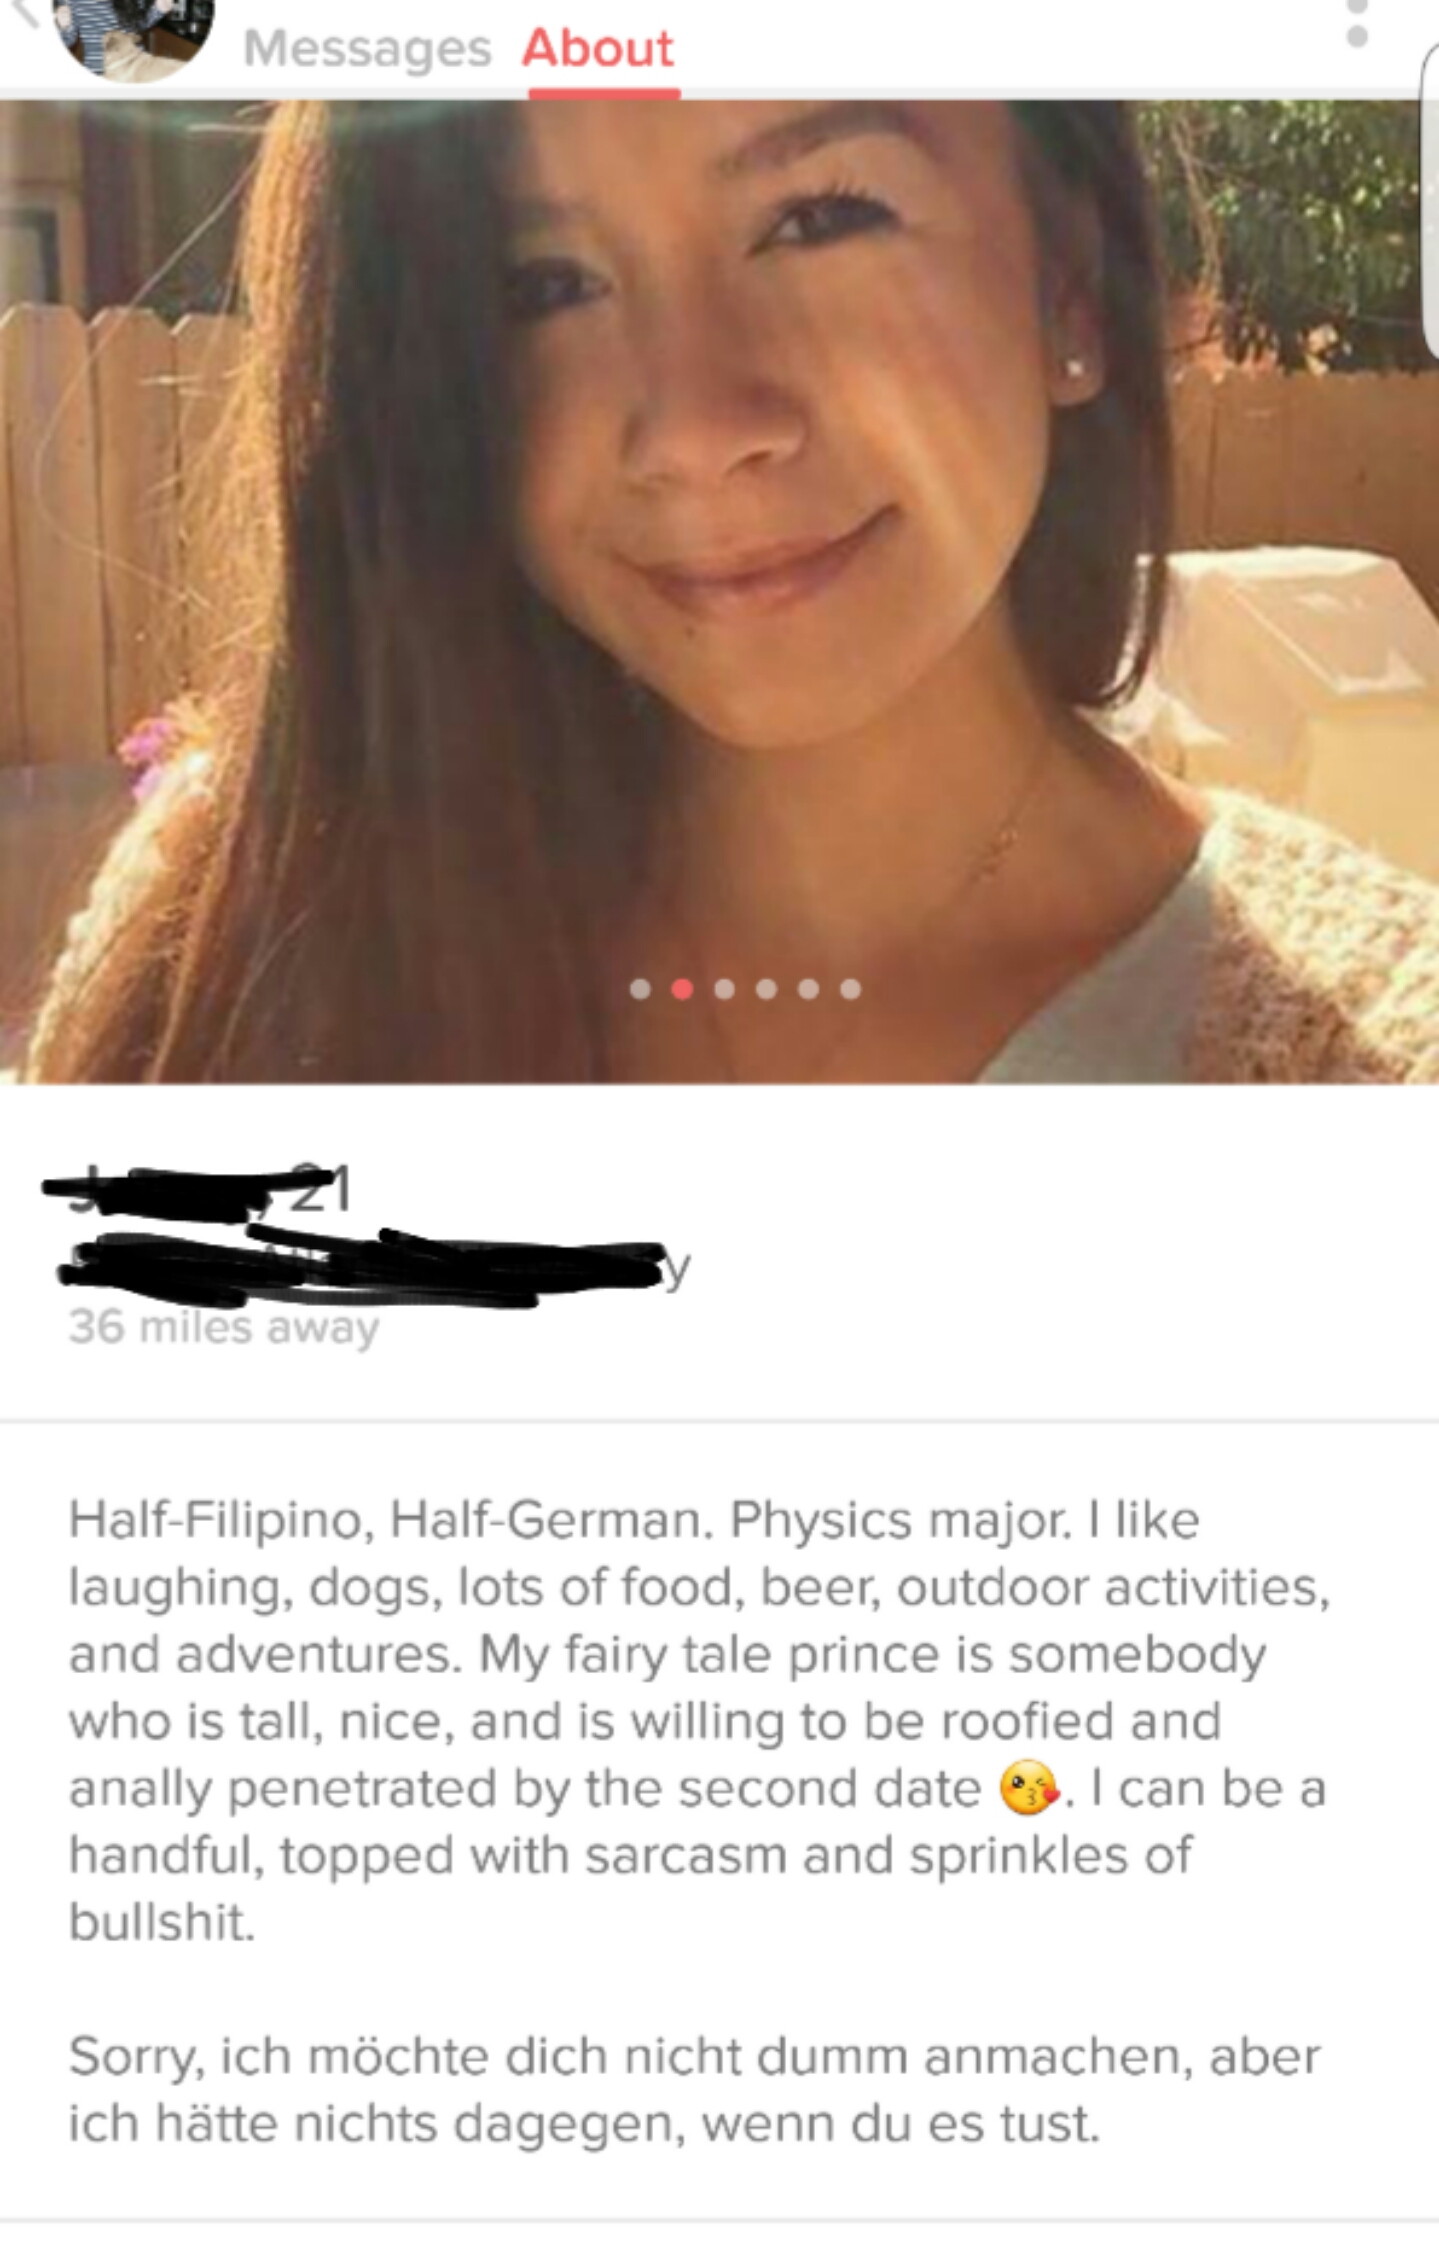 lip - Messages About 36 miles away Half Filipino, HalfGerman. Physics major. I laughing, dogs, lots of food, beer, outdoor activities, and adventures. My fairy tale prince is somebody who is tall, nice, and is willing to be roofied and anally penetrated b